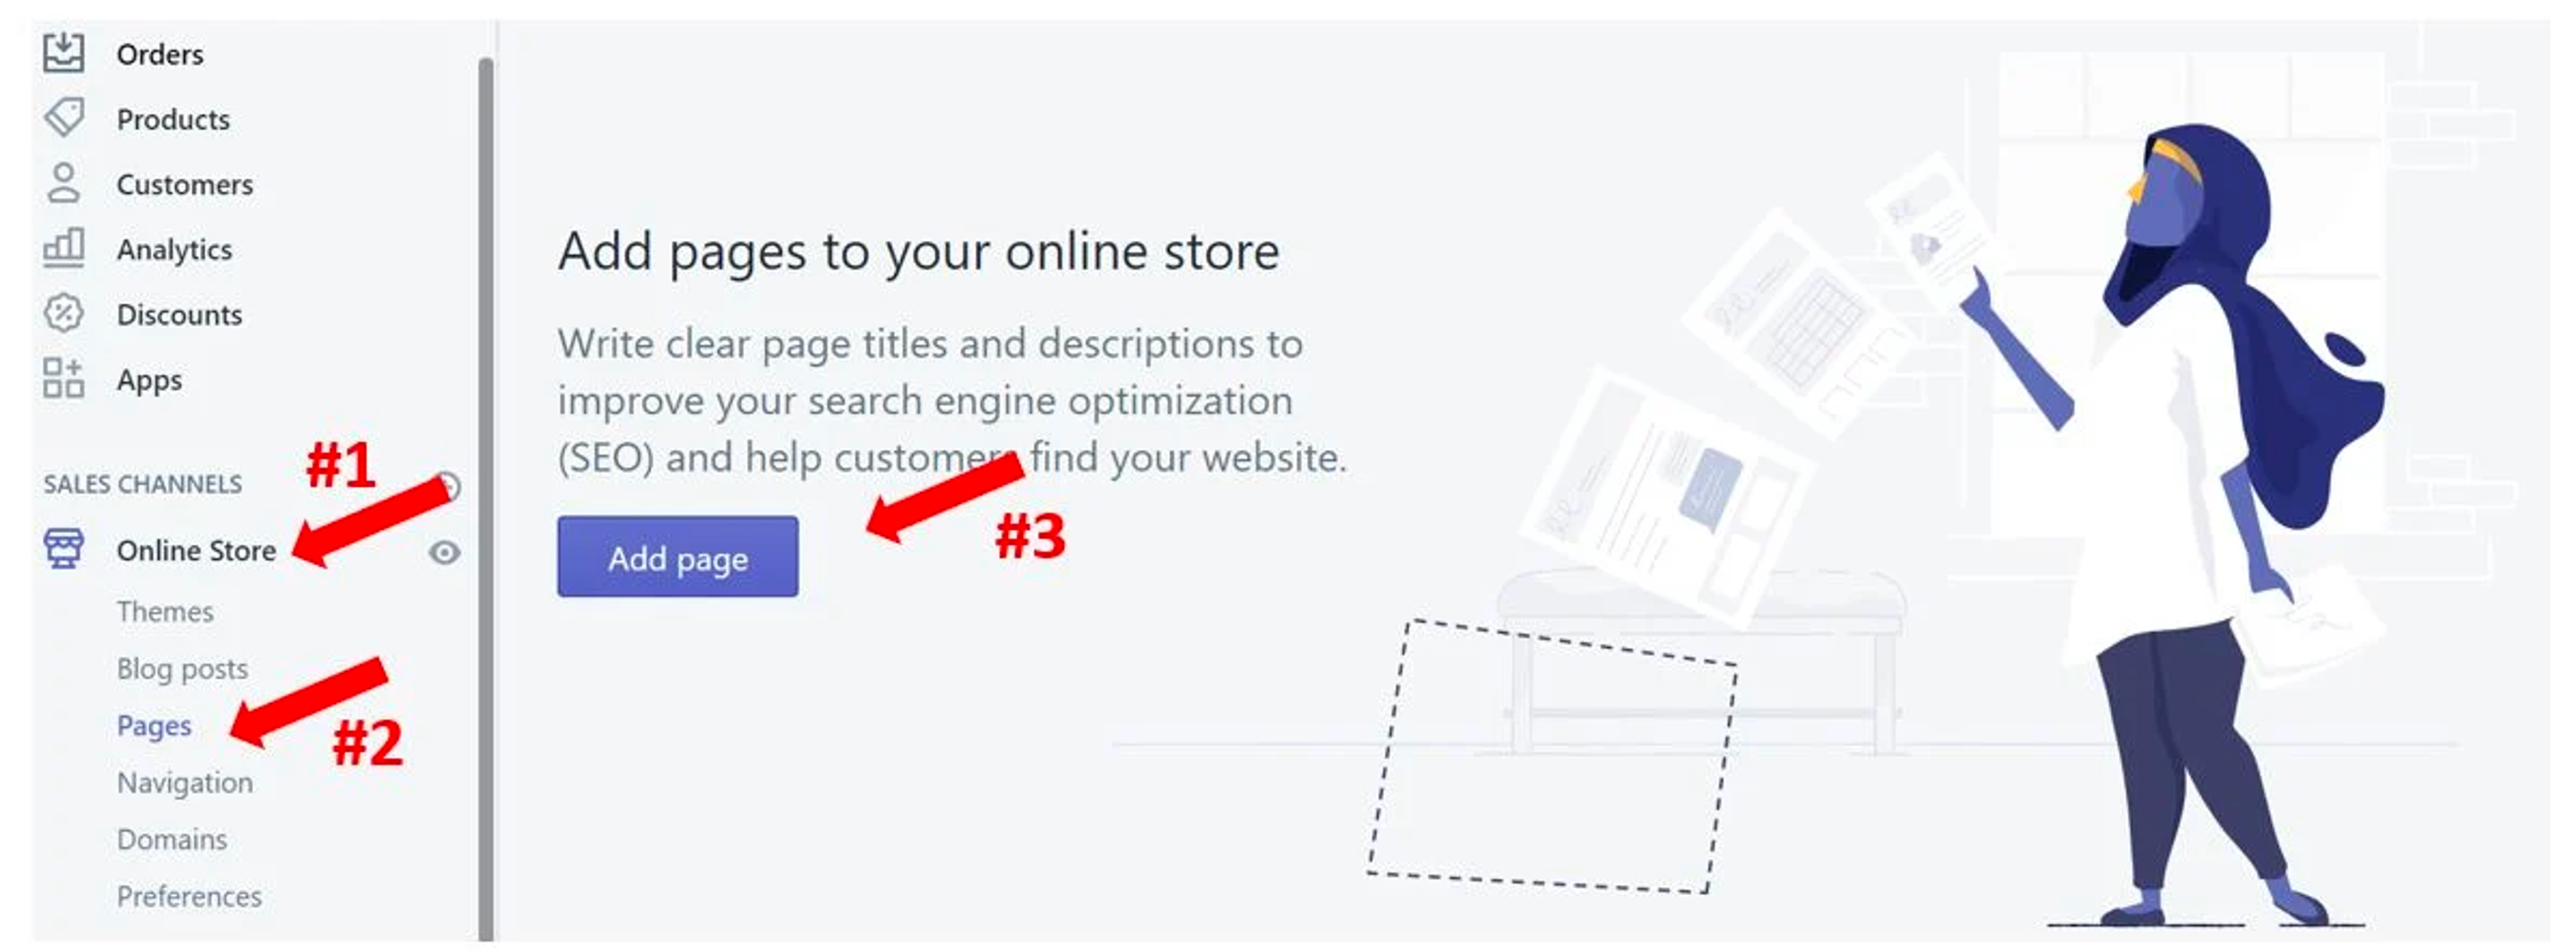 Add page in Shopify